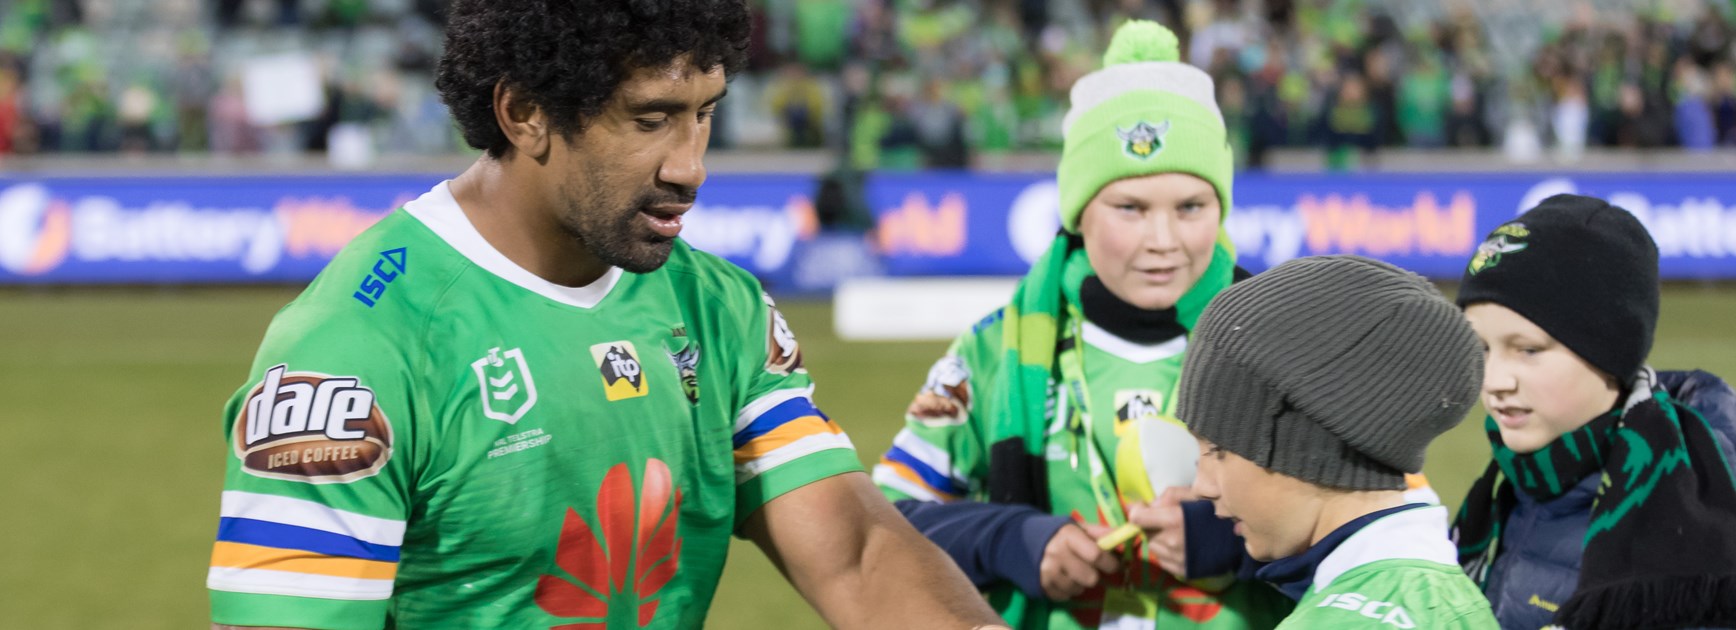 Sia Soliola signs and distributes mini footballs to young Raiders fans at a recent home game.